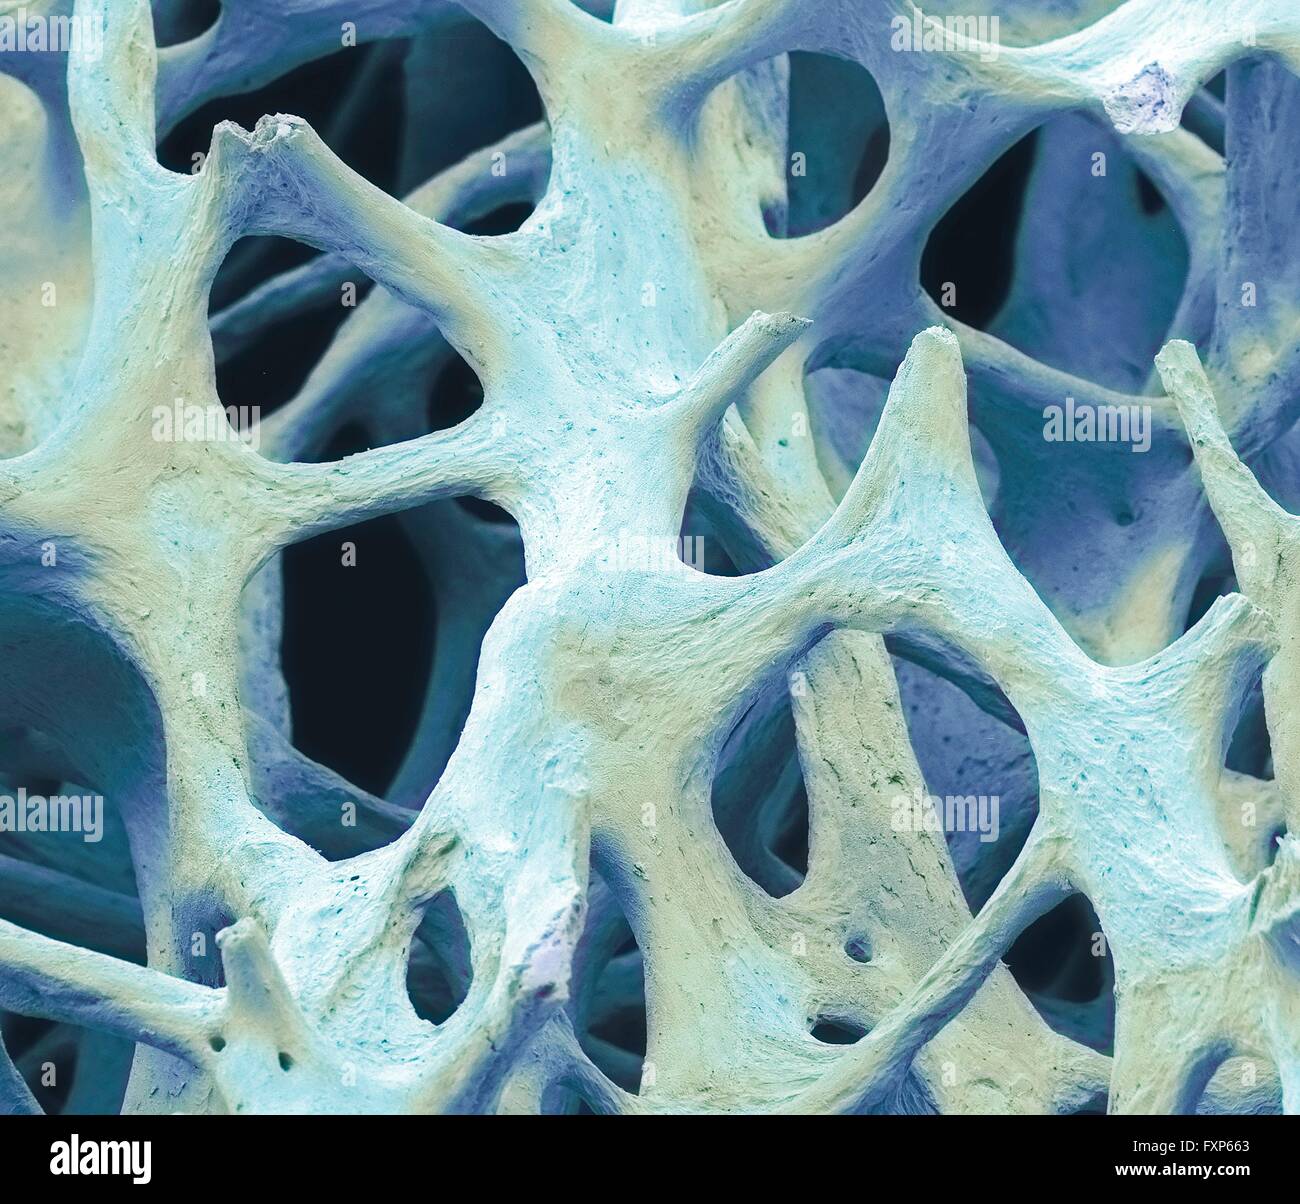 Bone tissue. Coloured scanning electron micrograph (SEM) of cancellous (spongy) bone. Bone tissue can be either cortical (compact) or cancellous. Cortical bone usually makes up the exterior of the bone, while cancellous bone is found in the interior. Cancellous bone is characterised by a honeycomb arrangement, comprising a network of trabeculae (rod-shaped tissue). These structures provide support and strength to the bone. The spaces within this tissue contain bone marrow (not seen), a blood forming substance. Magnification: x40 when printed 10cm wide. Stock Photo